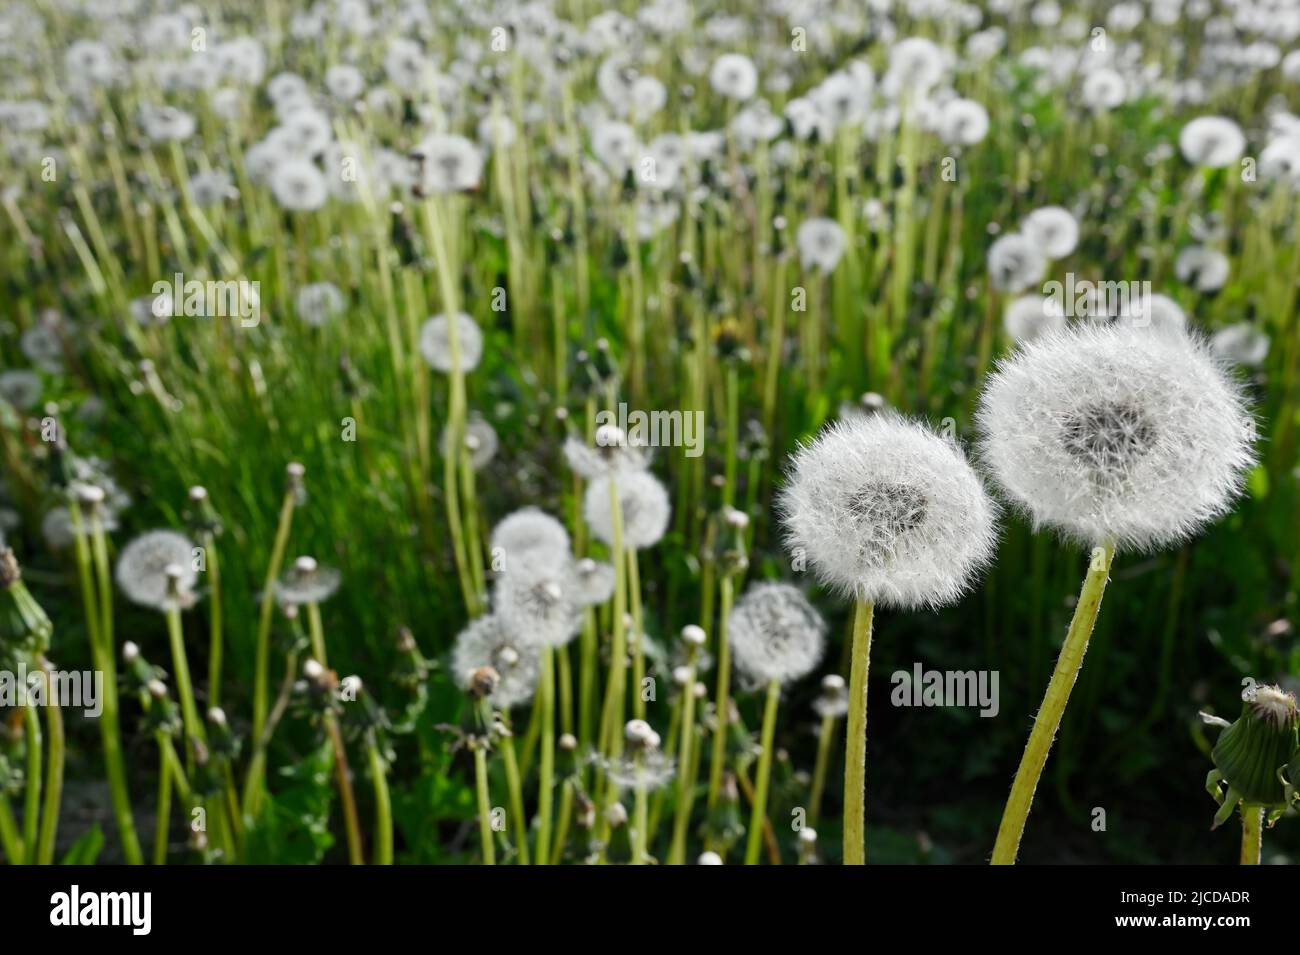 dandelion blowballs or seed heads on a meadow in summer Stock Photo